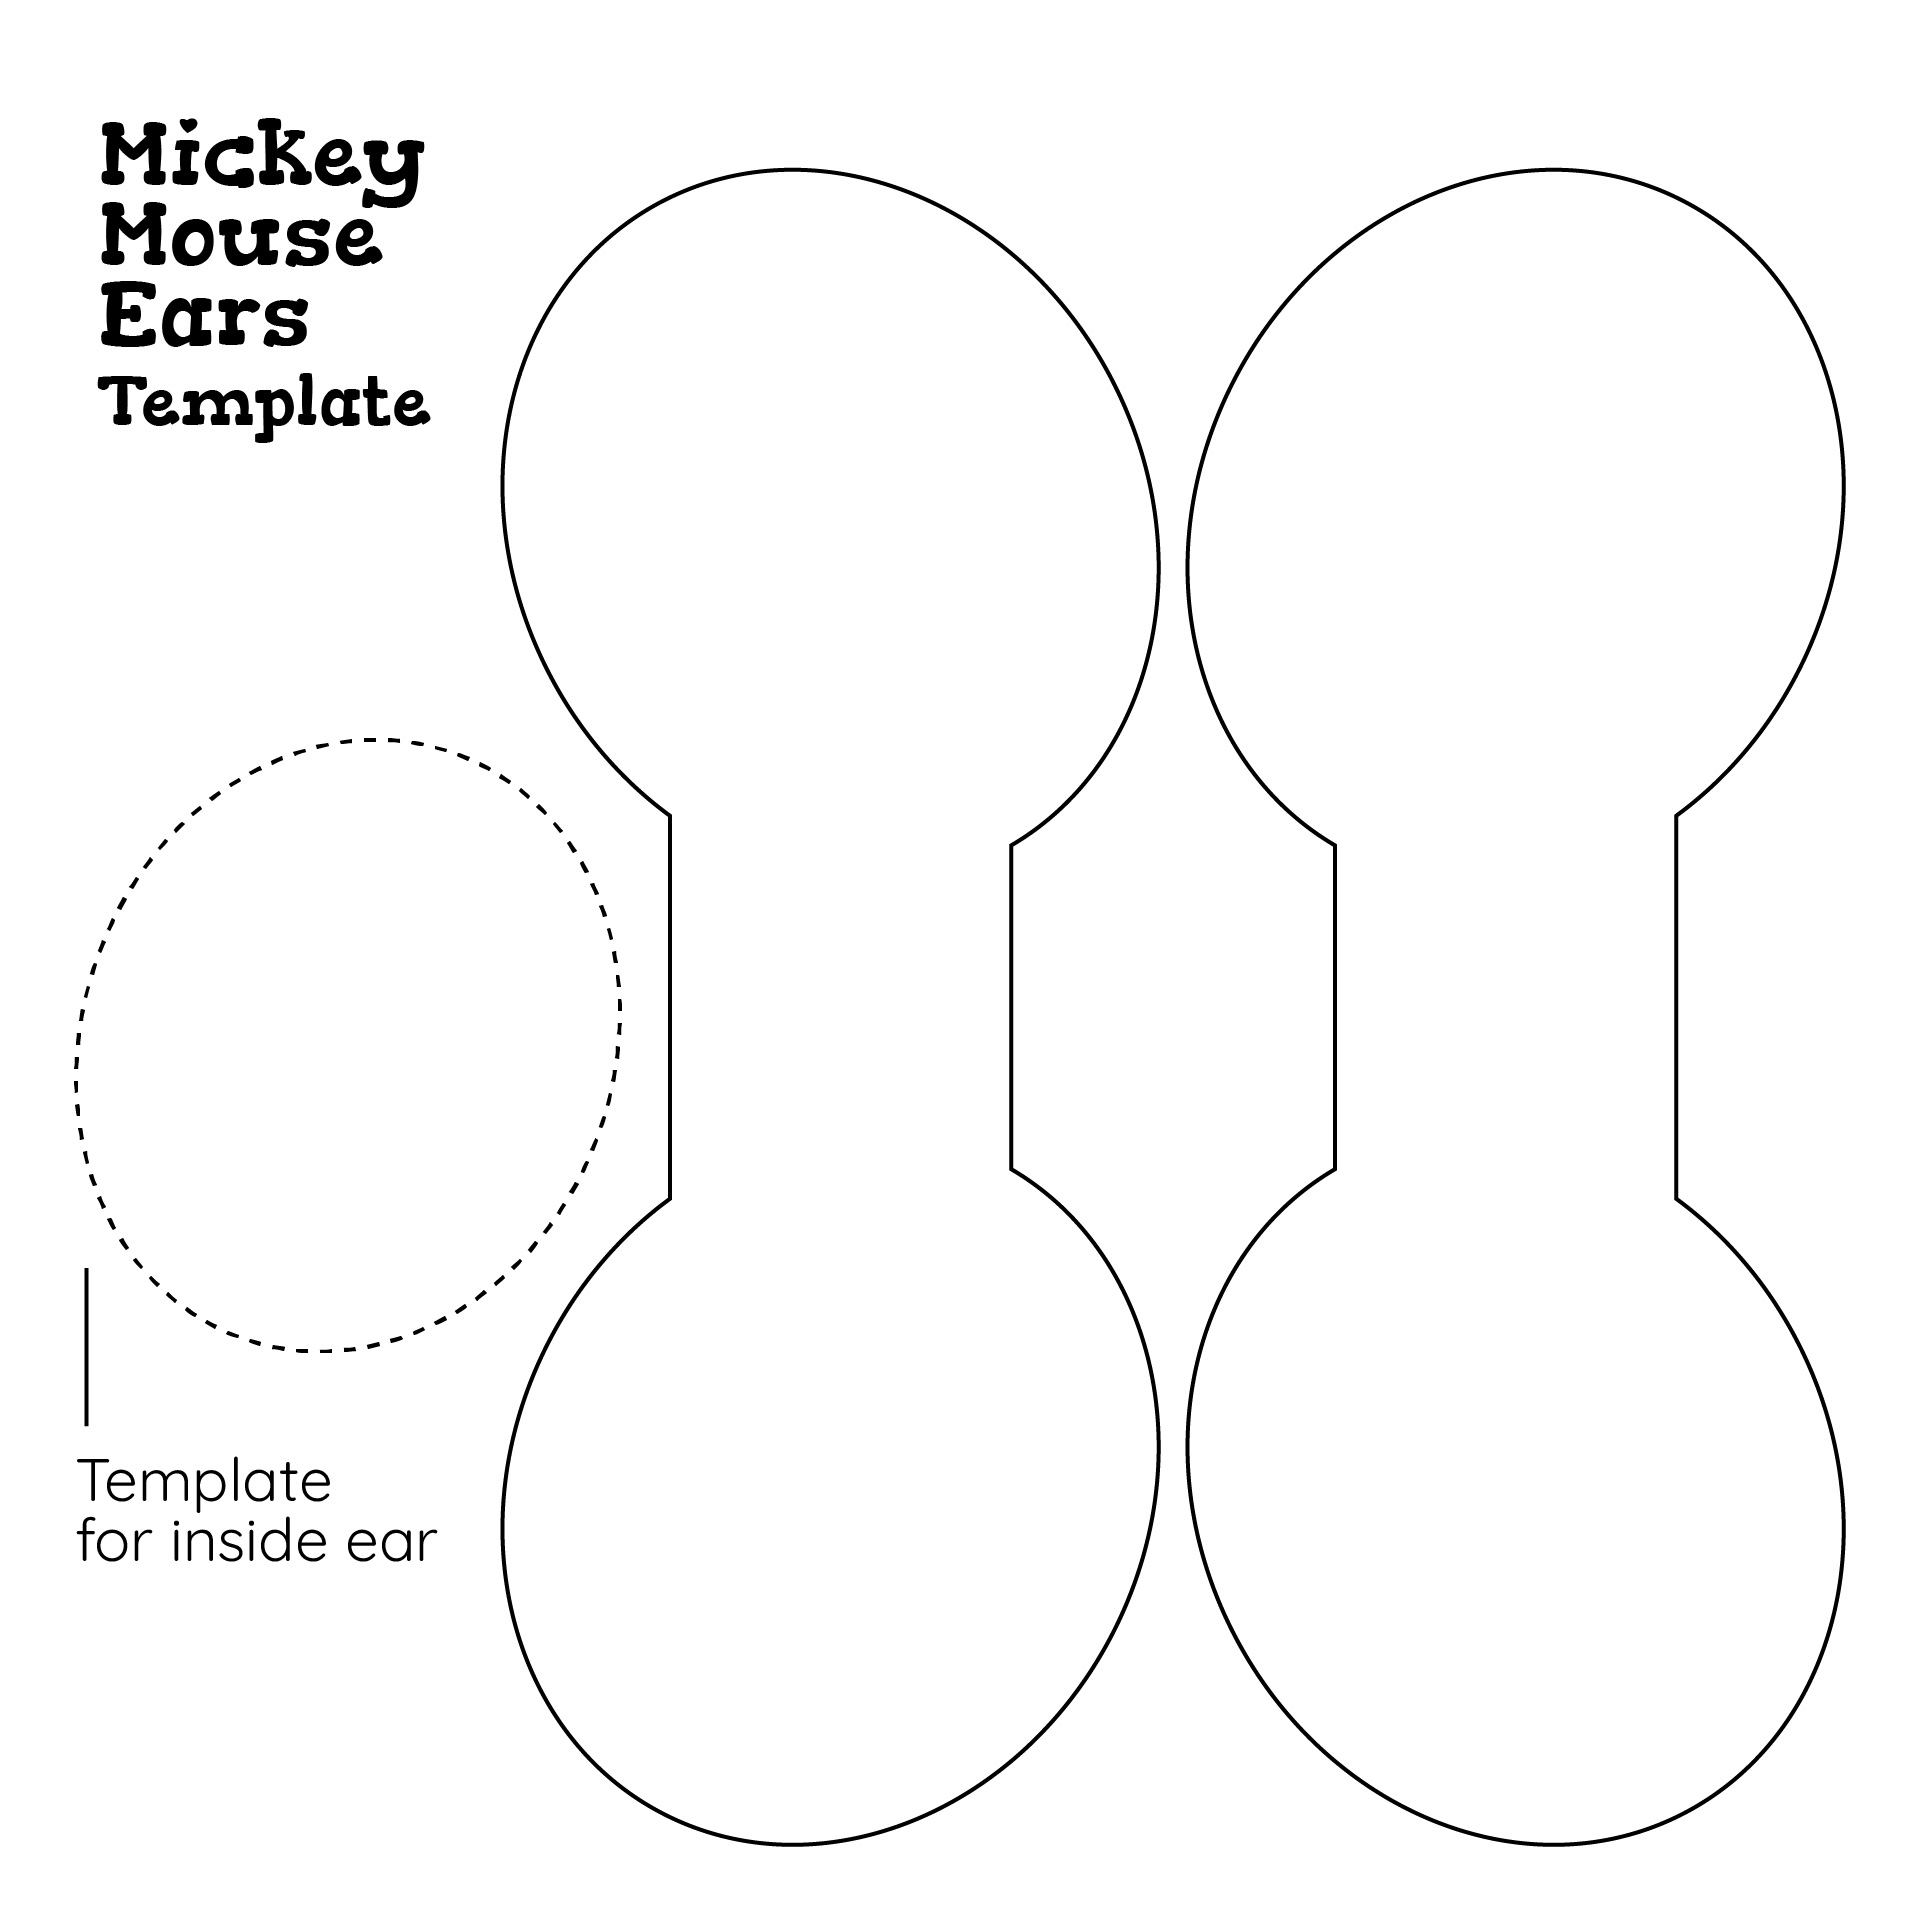 DIY Mickey Mouse Ears Template